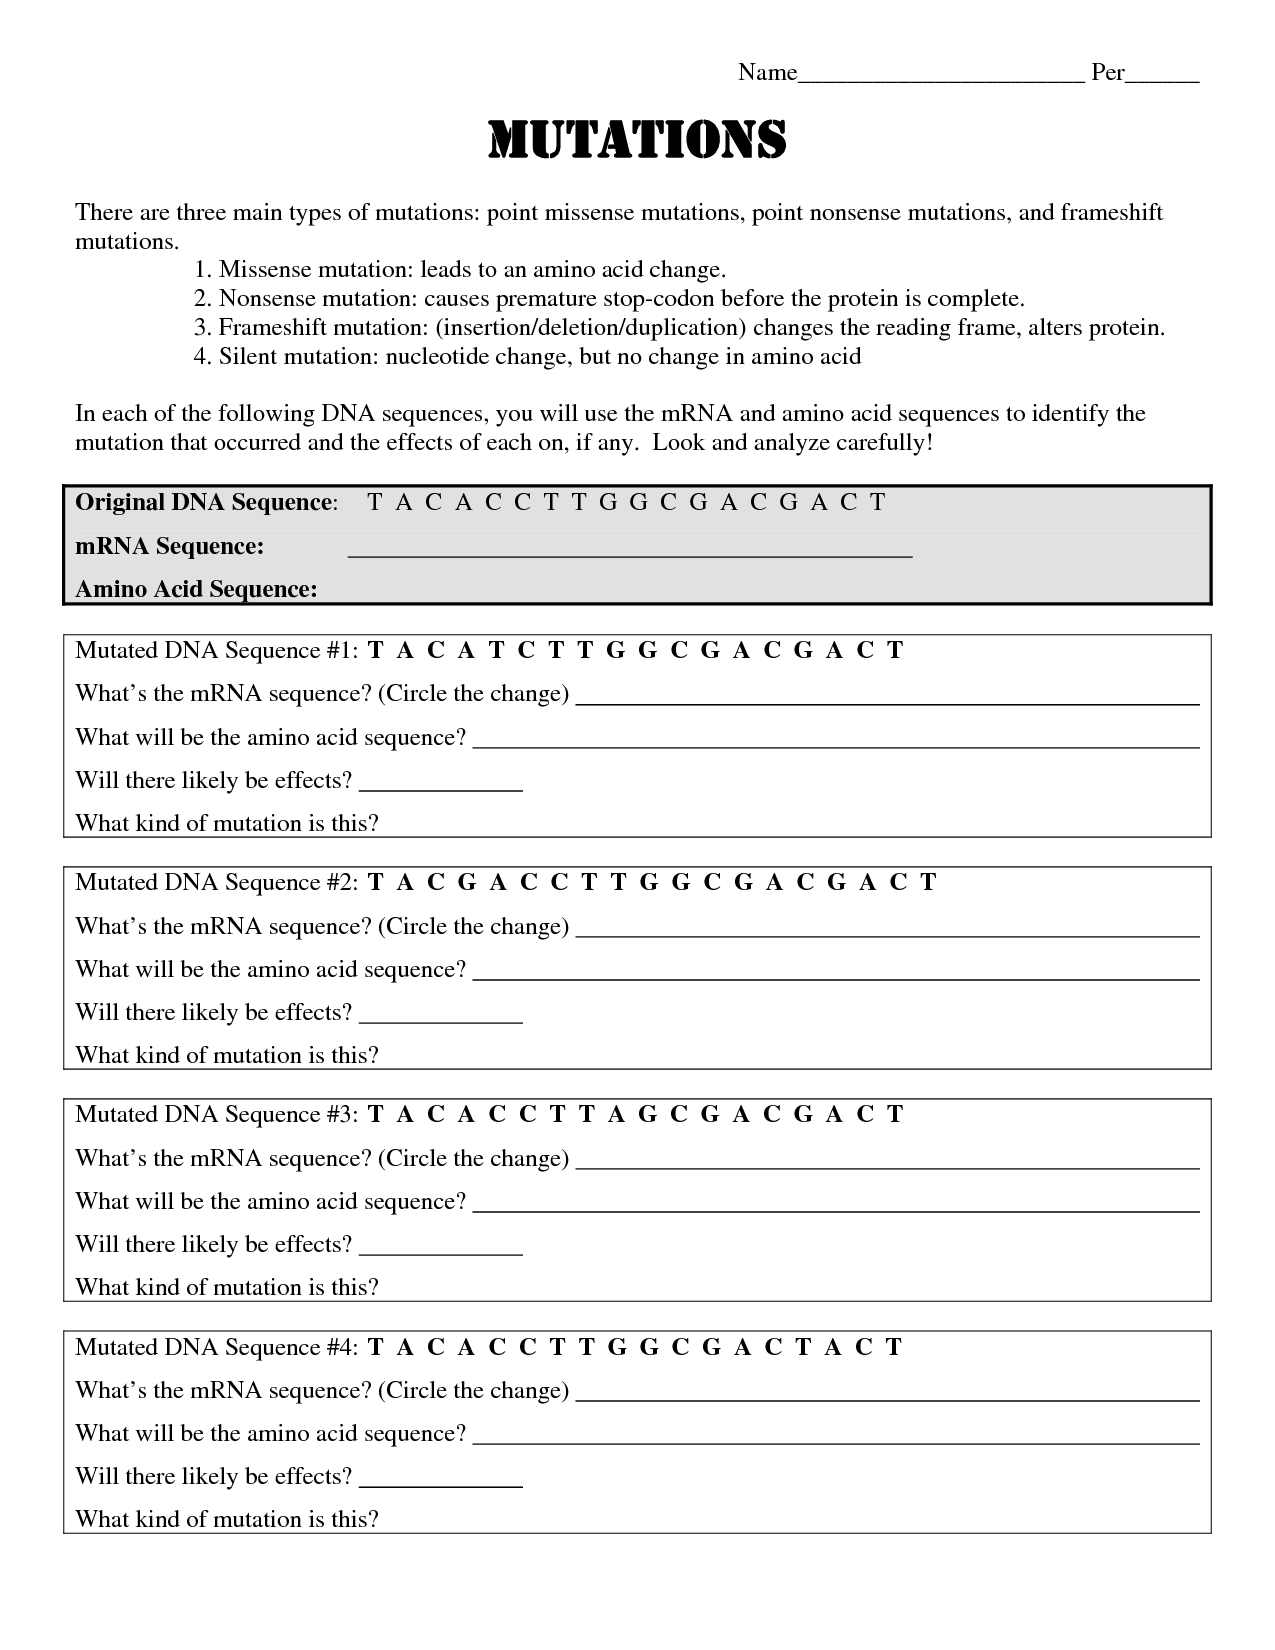 Dna Mutations Practice Worksheet Conclusion Answers Key With Genetic Mutation Worksheet Answer Key